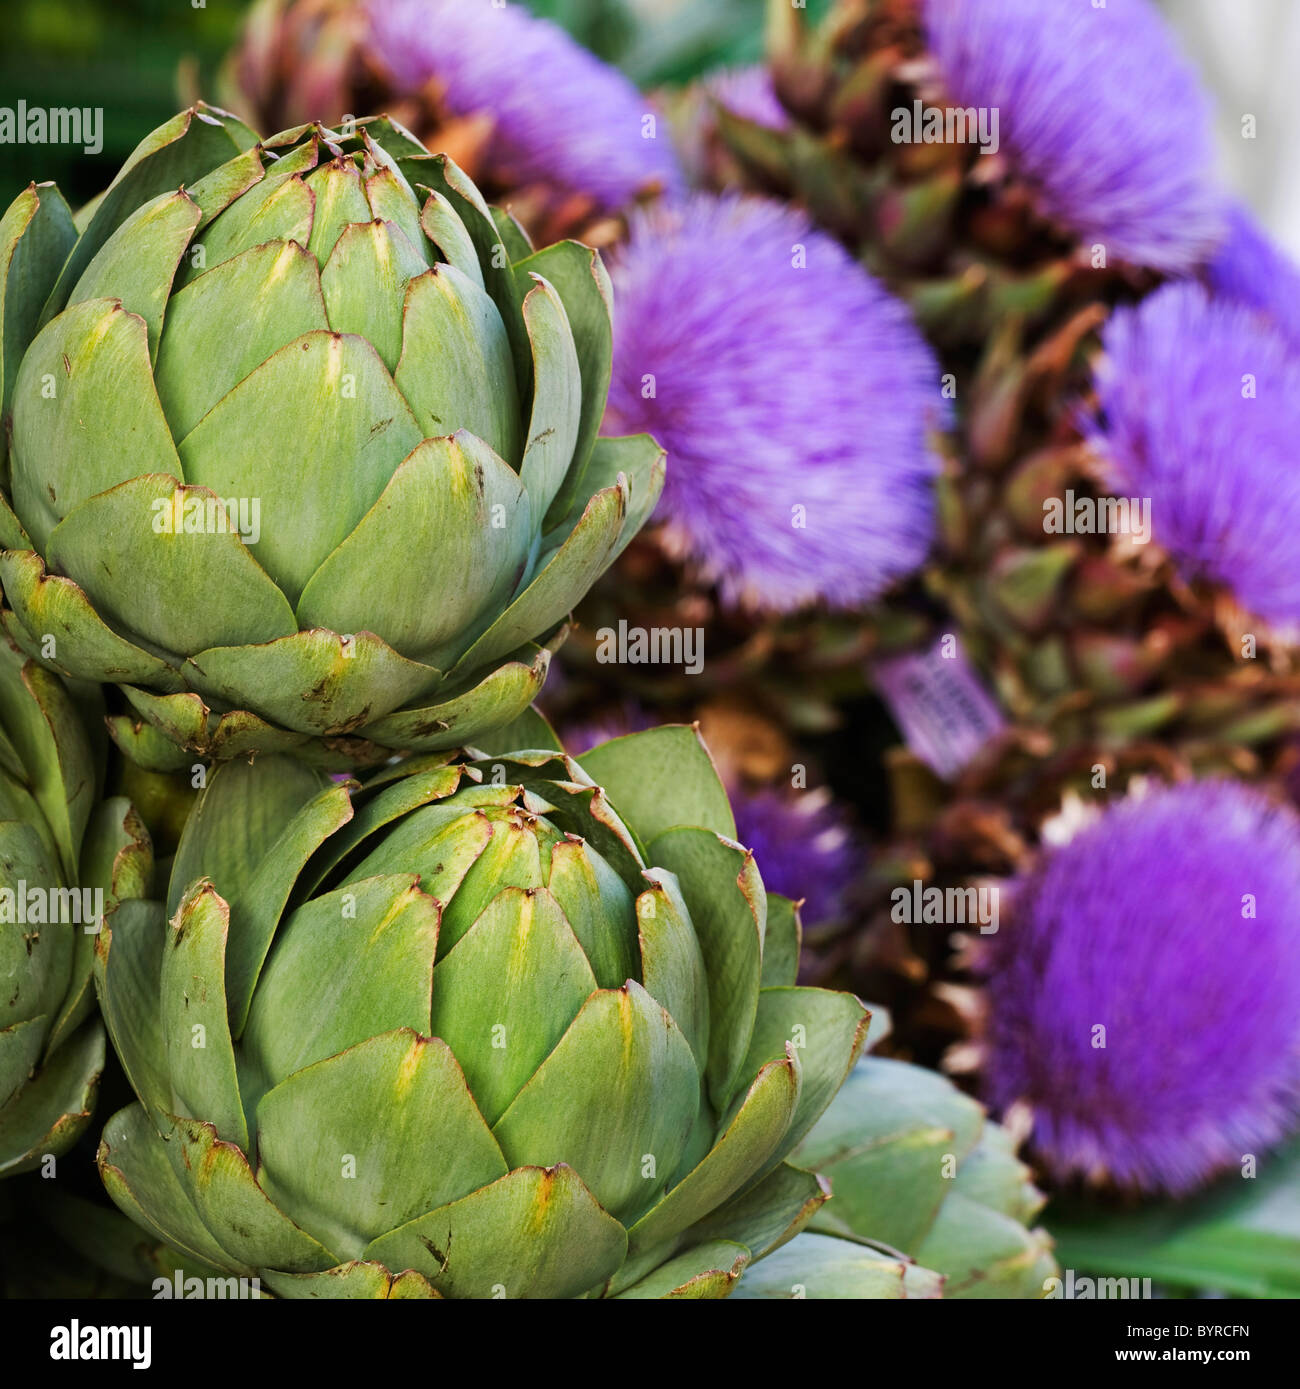 artichokes with artichoke flowers in the background; munich, germany Stock Photo